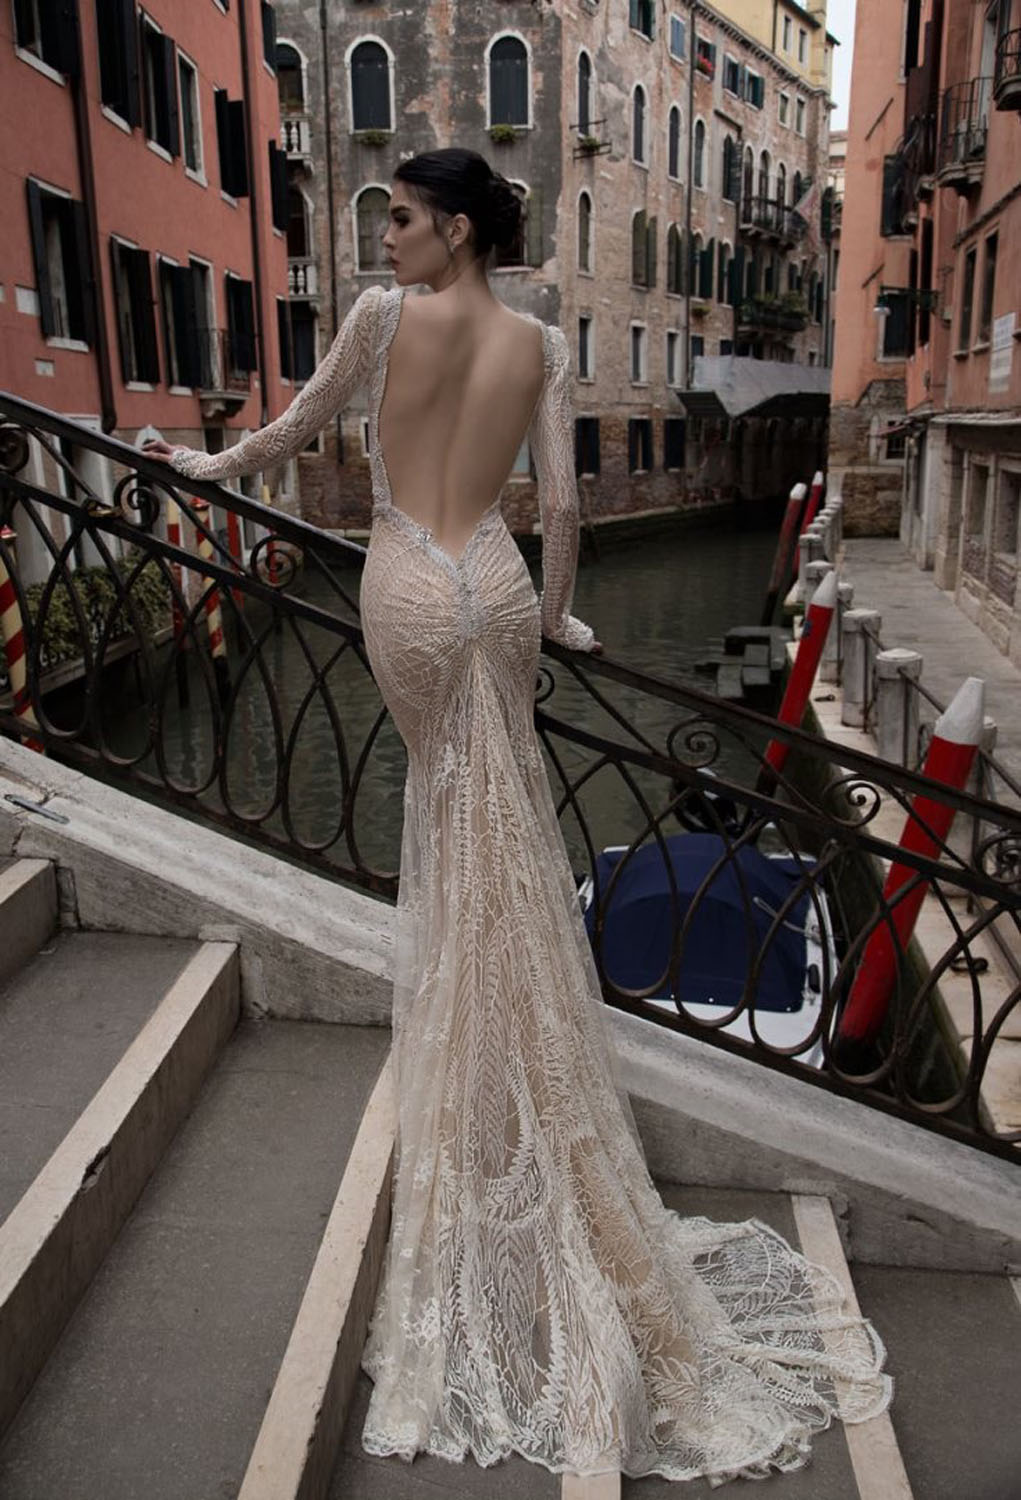 inbal-dror-15-08-lace-mermaid-fit-and-flare-sheath-wedding-dress-with-sleeves-and-low-back-dimitras-bridal-couture-back1